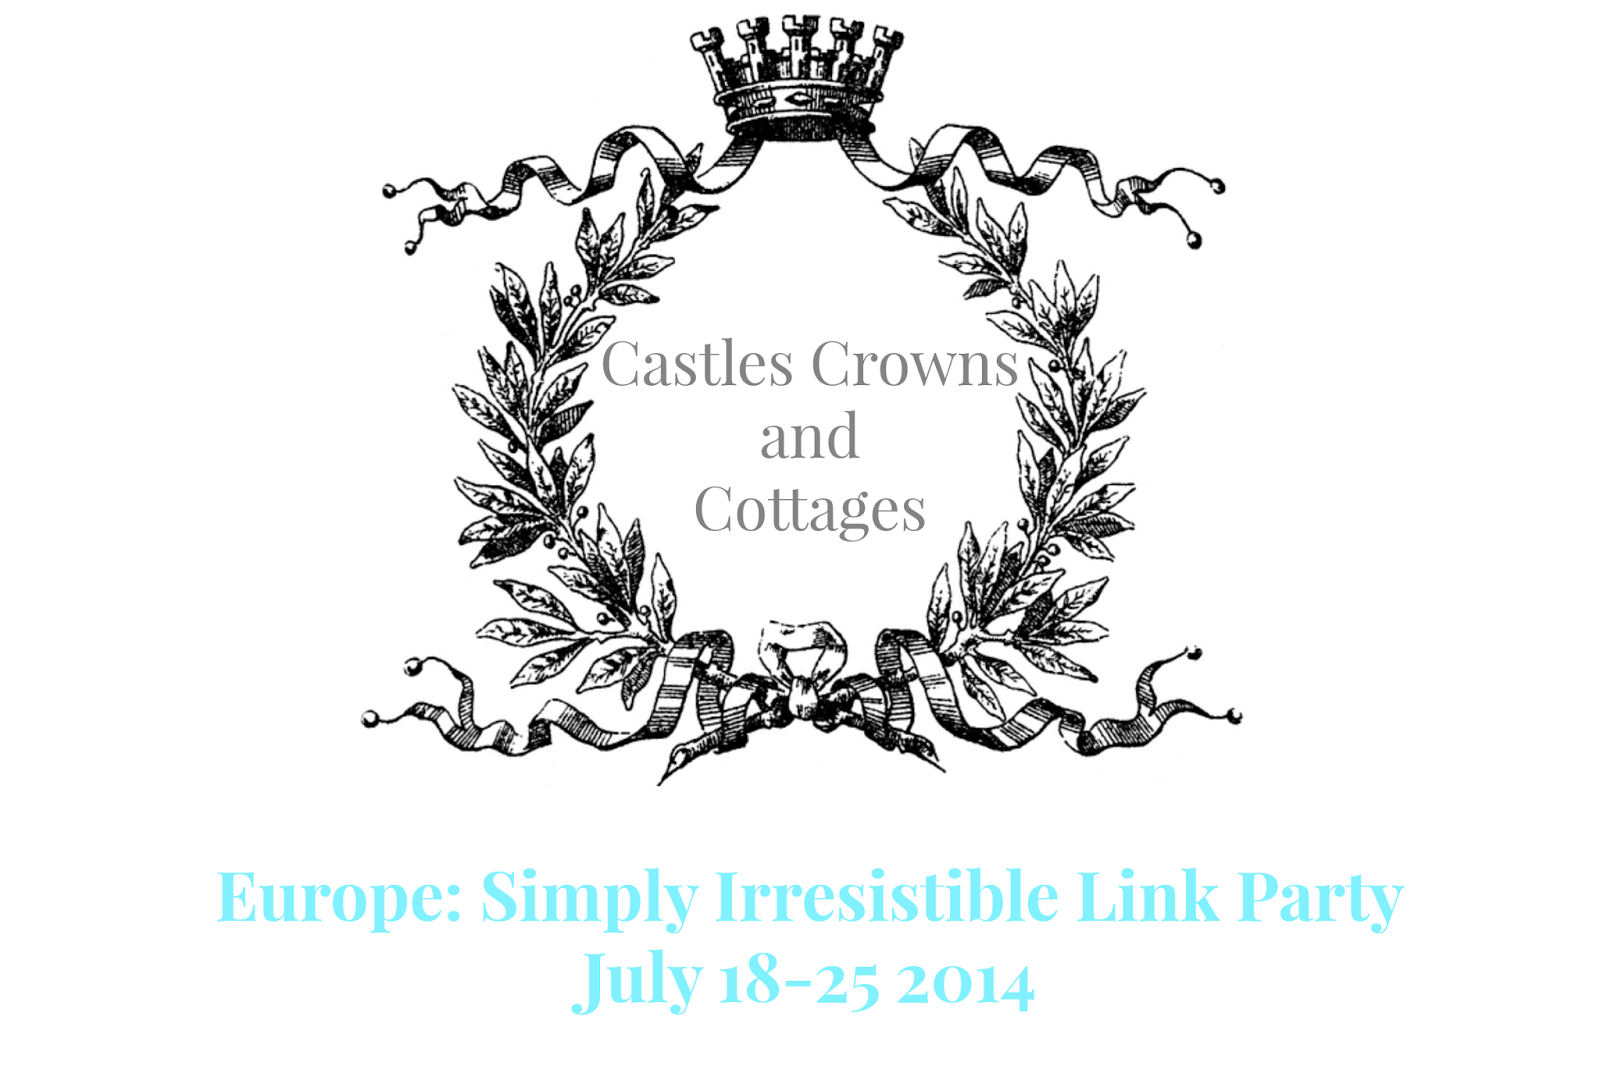 Europe: Simply Irresistible Link Party and Island Hopping in Italy